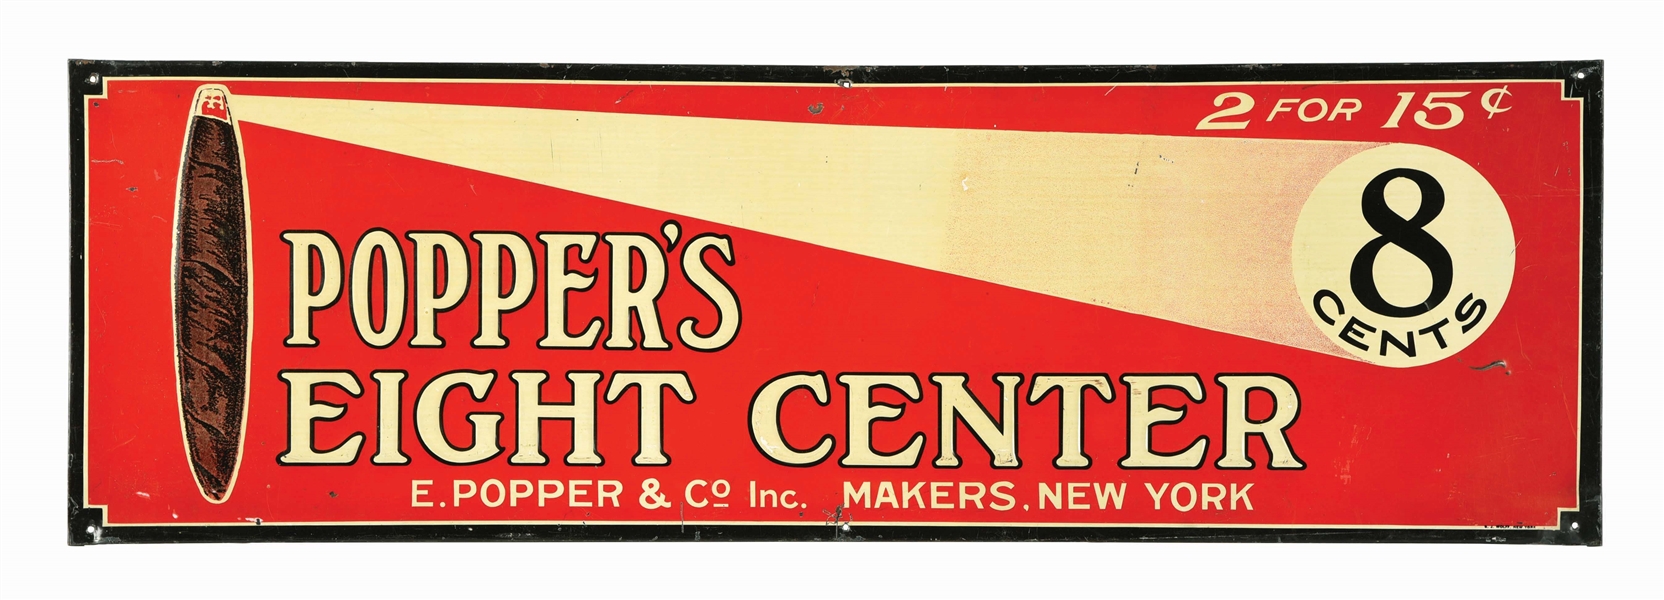 POPPERS EIGHT CENTER CIGAR EMBOSSED TIN SIGN. 